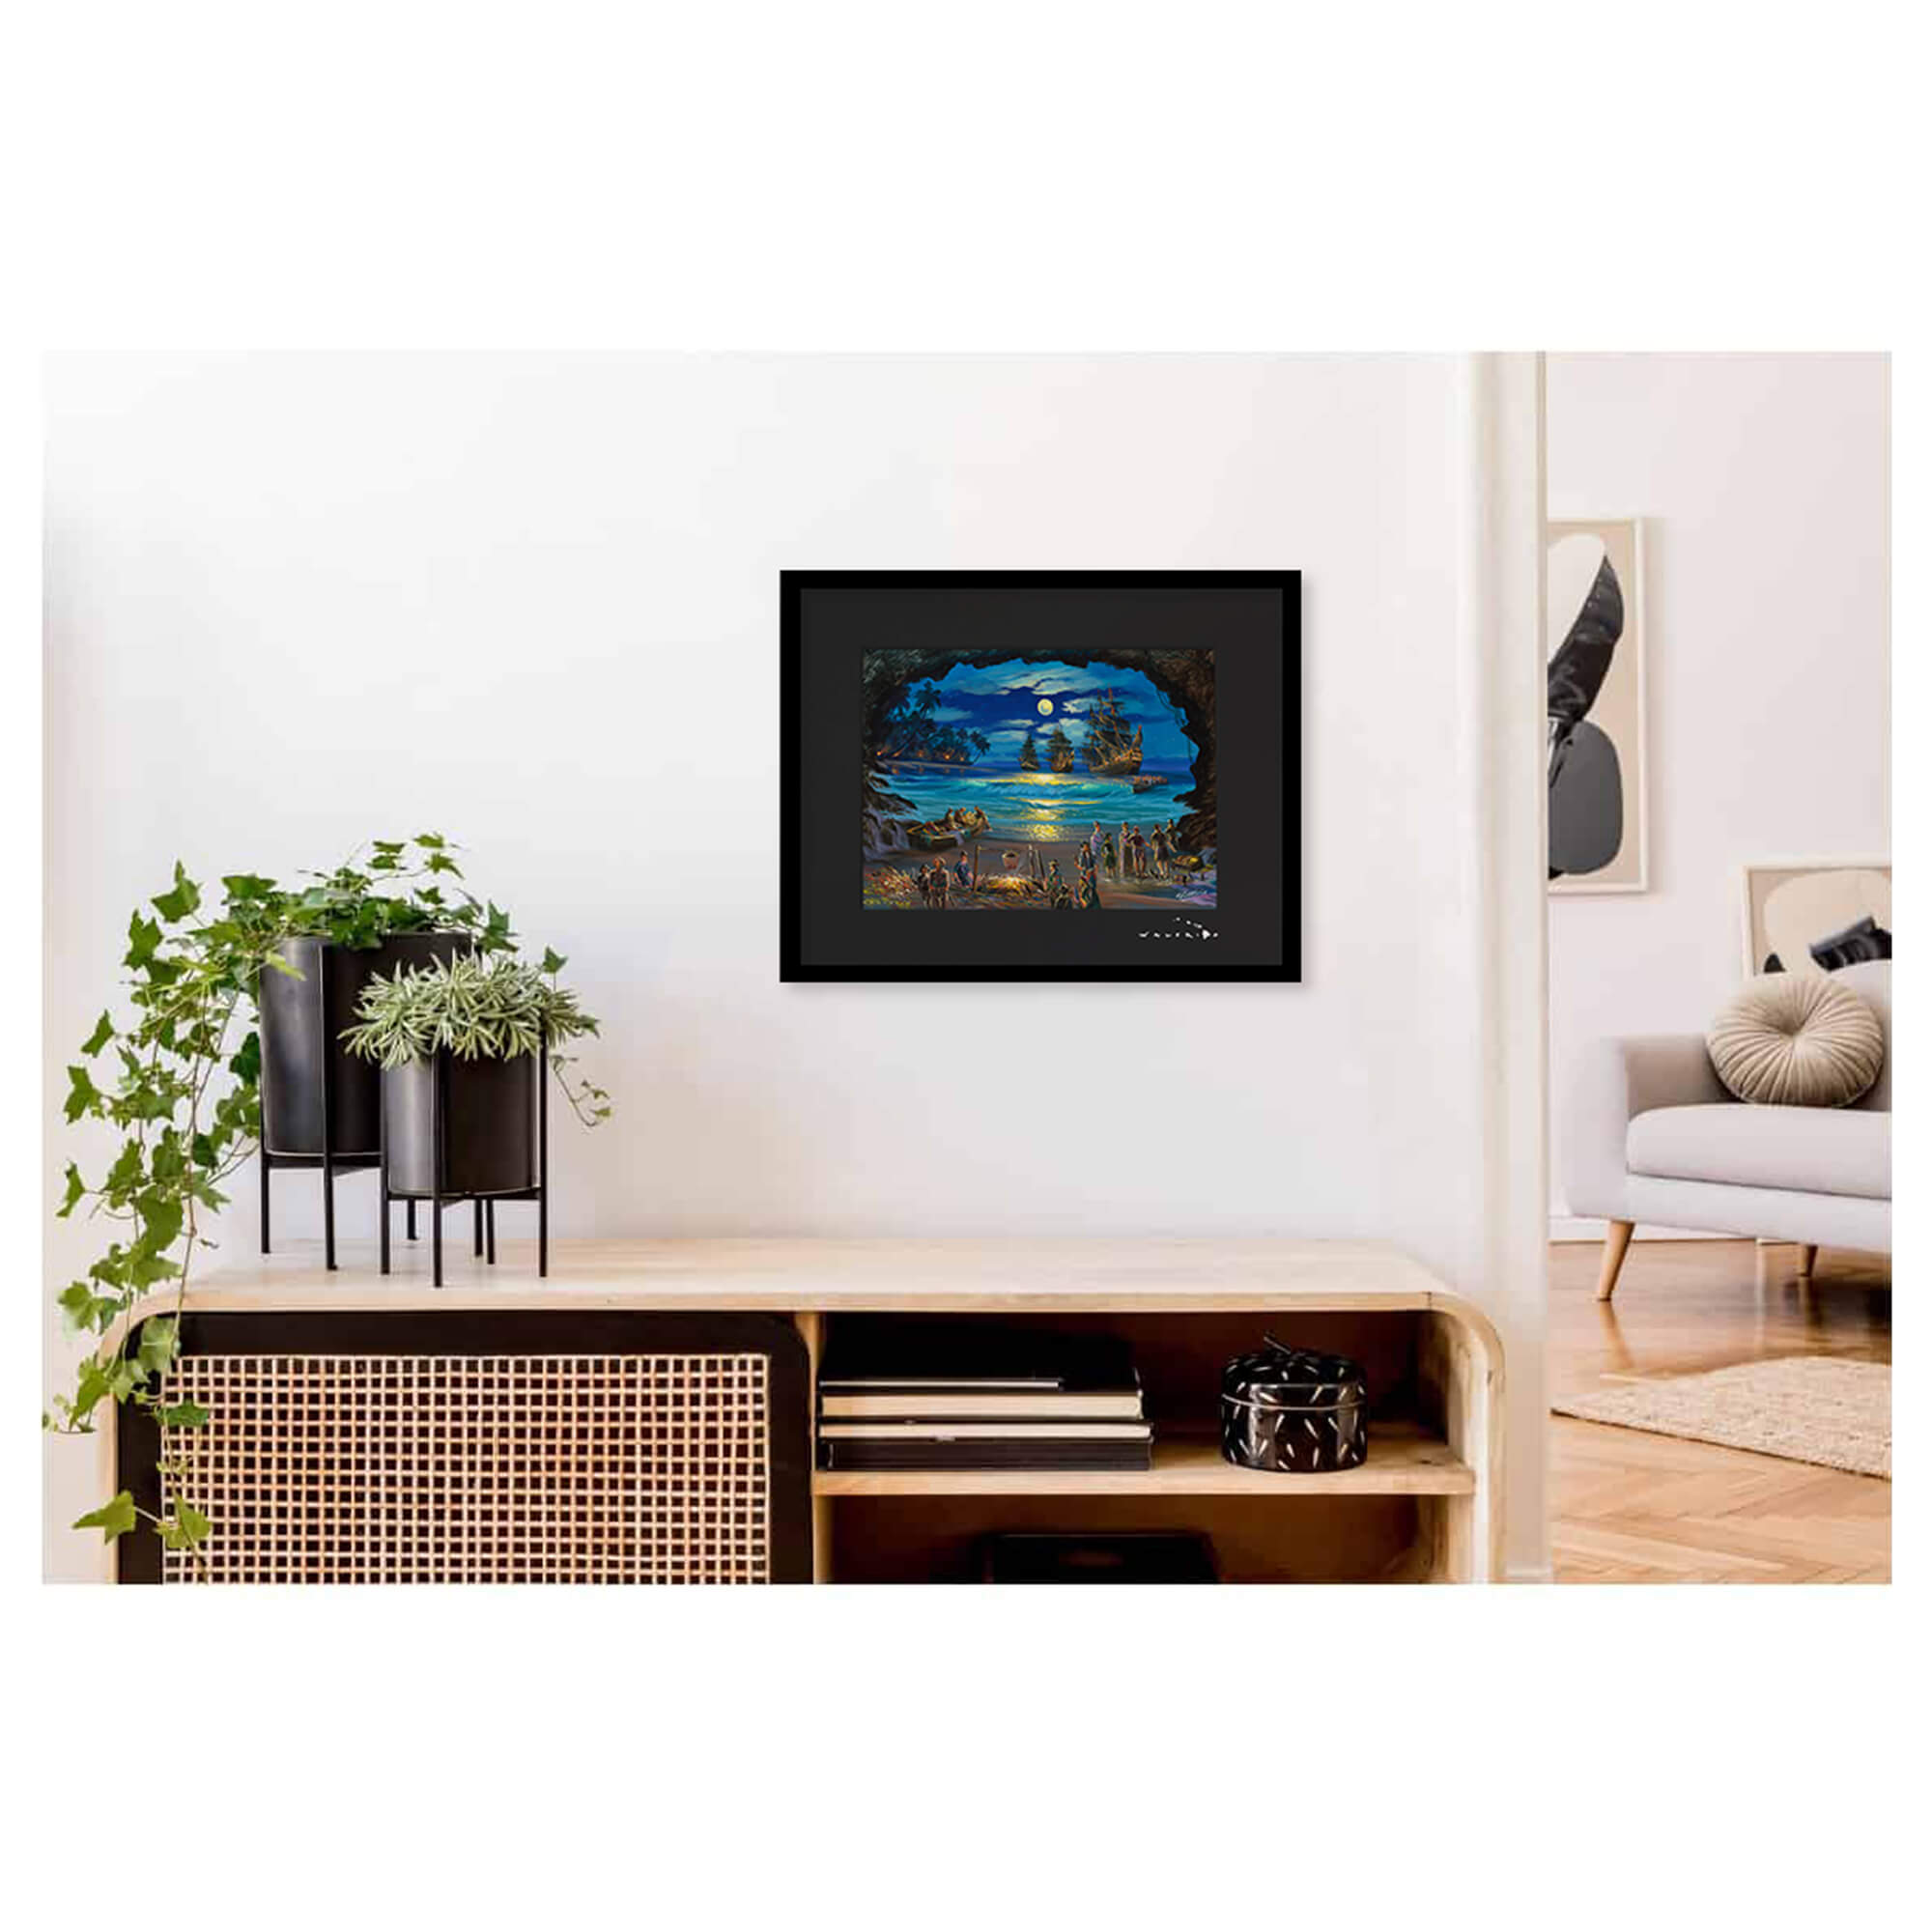 Framed matted art print featuring a cave framing merchants and vintage ships coming to the shores of Hawaii at night by Hawaii artist Walfrido Garcia